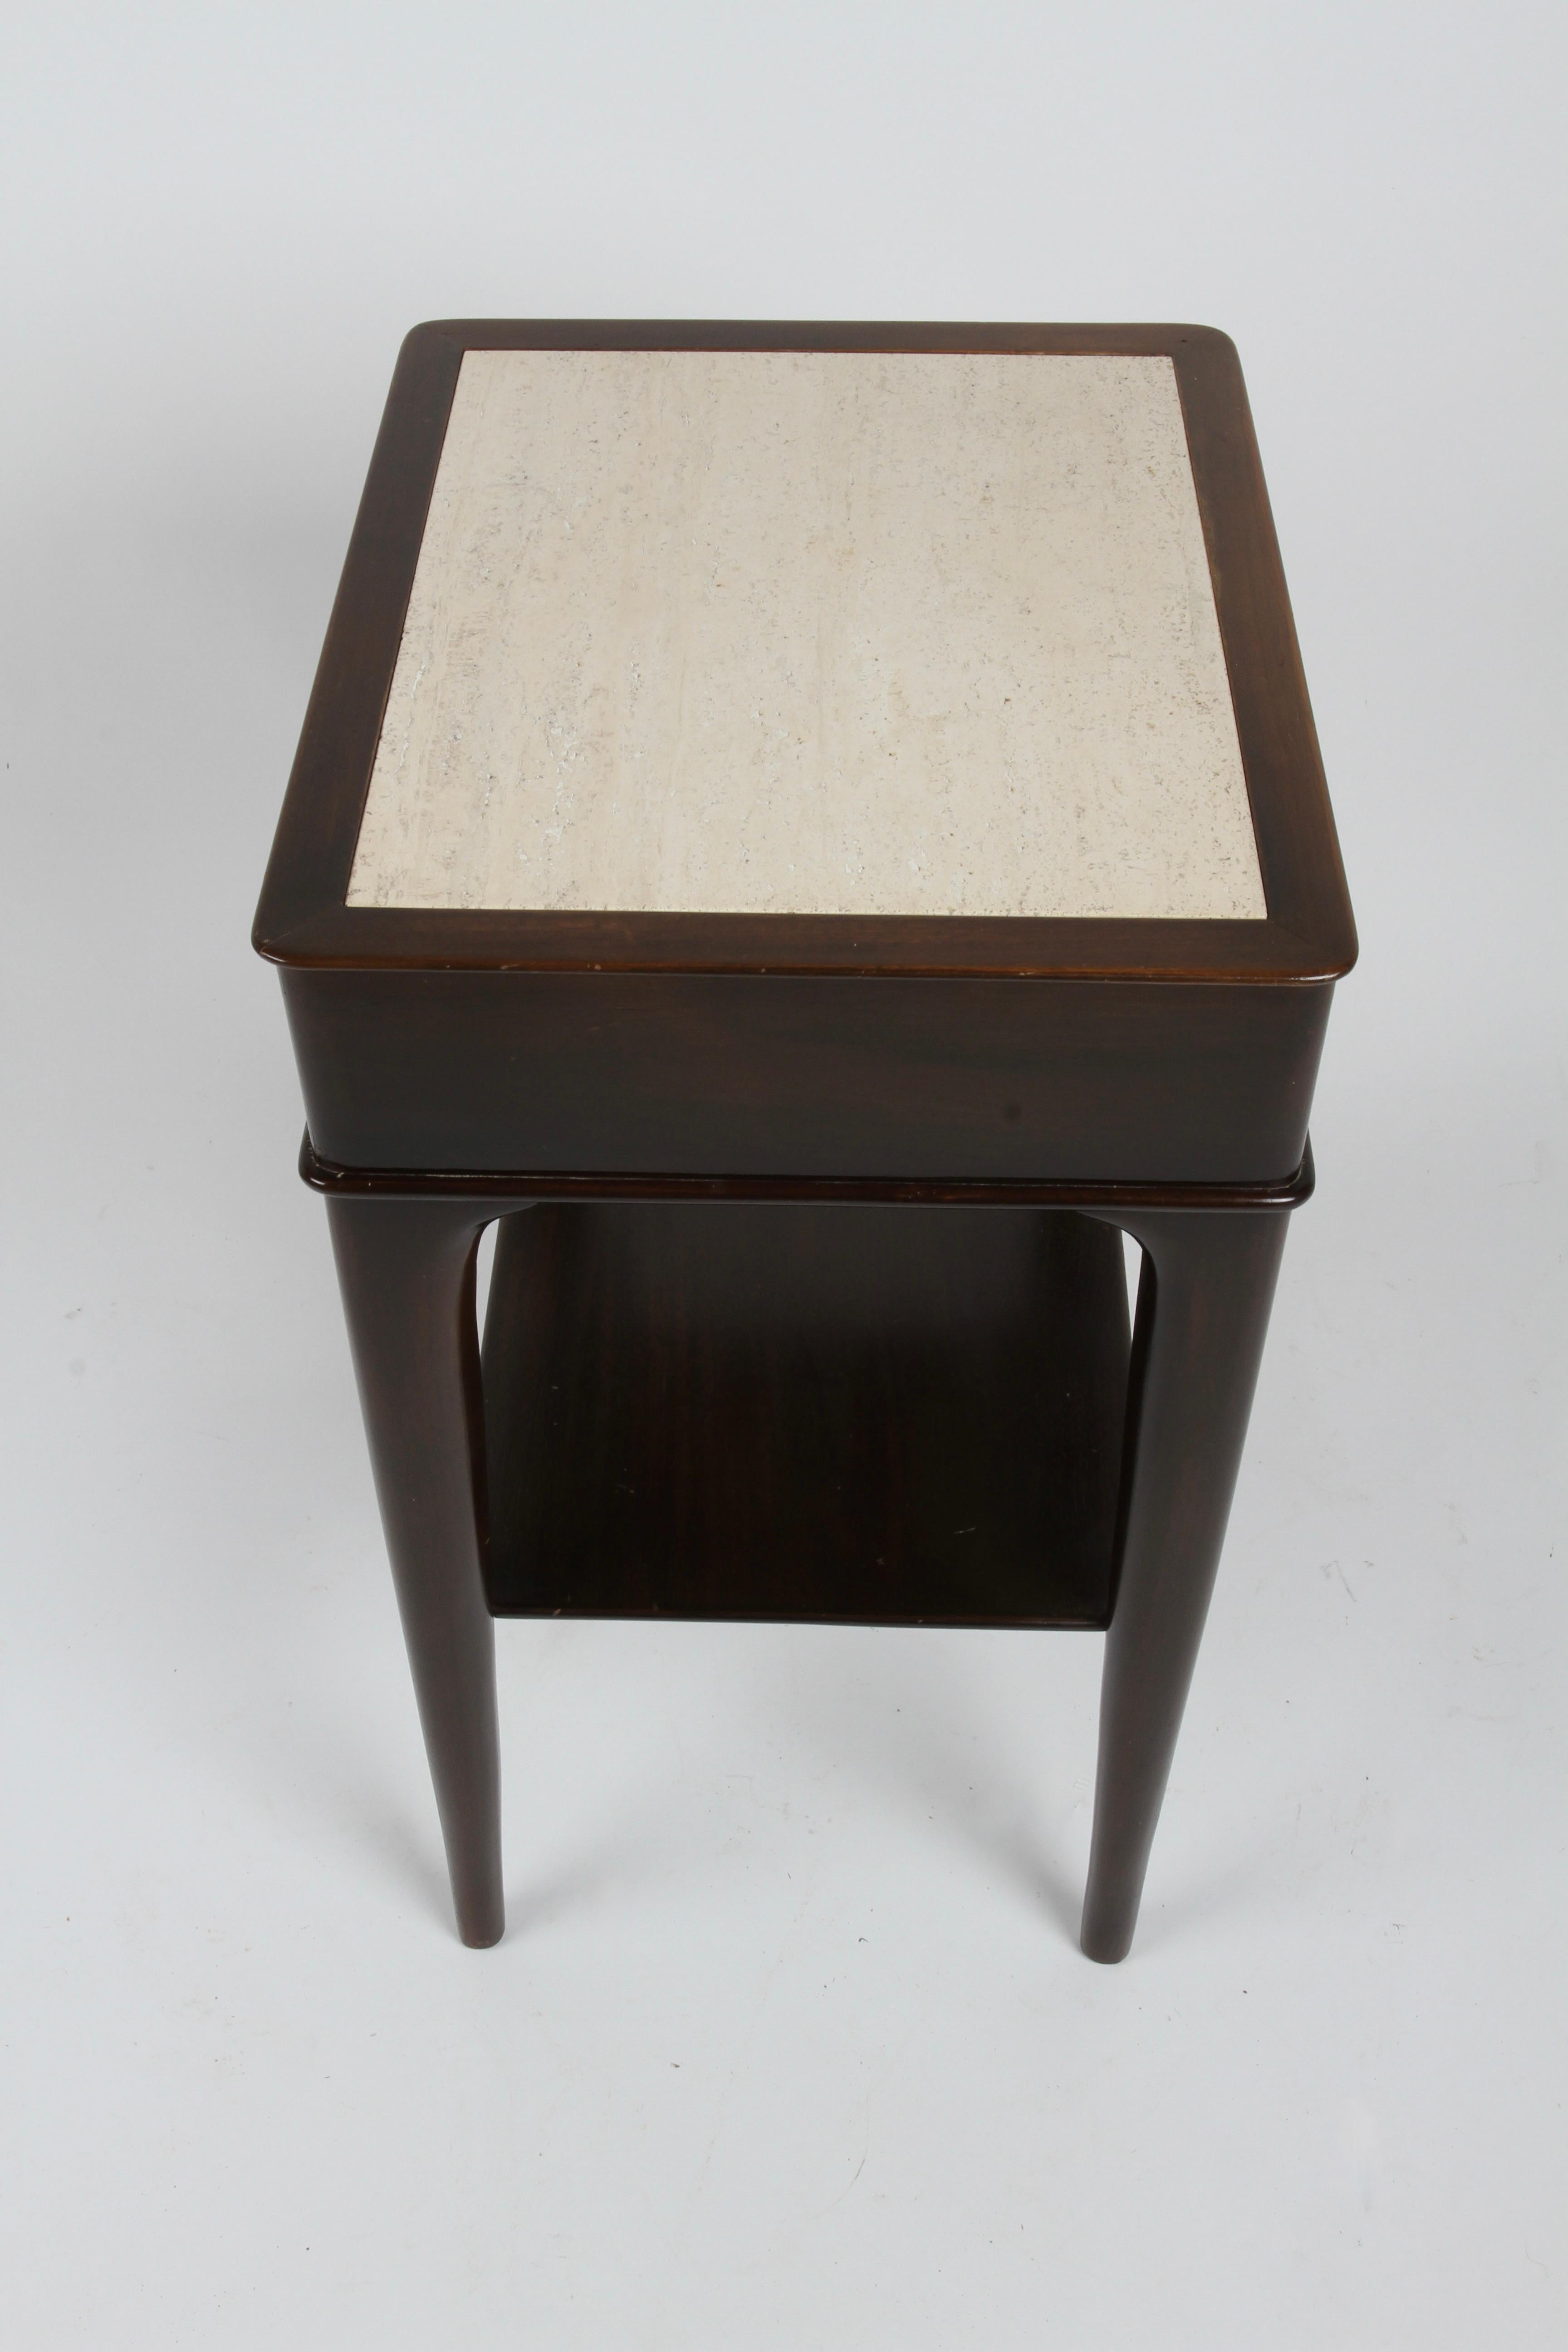 Pair of Rare Edward Wormley Dunbar for Modern Elegant Nightstands or End Tables  For Sale 7